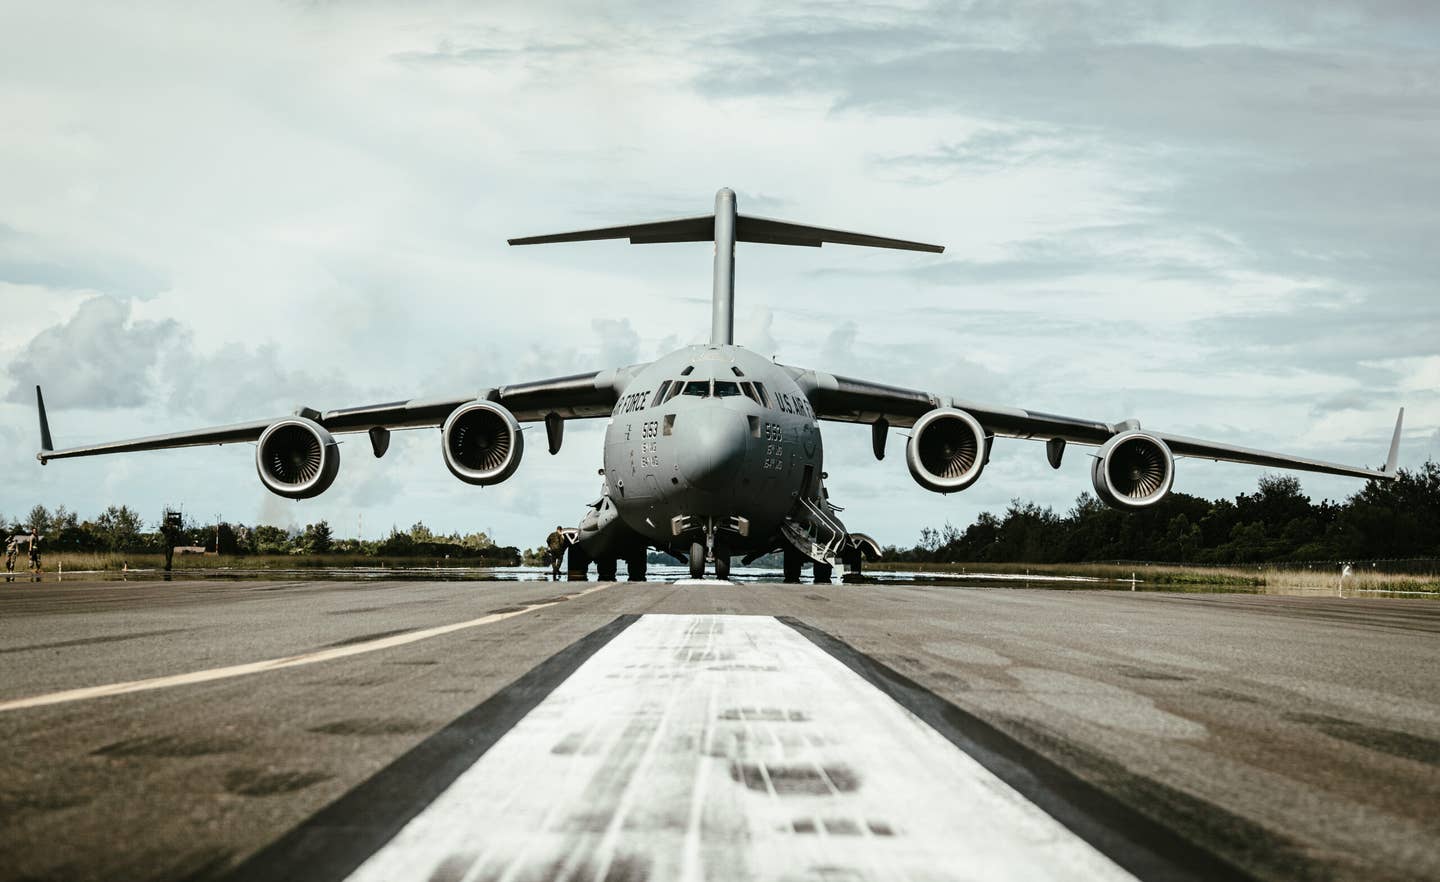 A U.S. Air Force C-17 Globemaster III, transporting personnel and equipment in support of Valiant Shield 22, lands on Palau, June 10, 2022. Exercises such as Valiant Shield allows the Indo-Pacific Command Joint Forces the opportunity to integrate forces from all branches of service to conduct precise, lethal, and overwhelming multi-axis, multi-domain effects that demonstrate the strength and versatility of the Joint Force and our commitment to a free and open Indo-Pacific. (U.S. Marine Corps photo by Cpl. Samuel Fletcher)